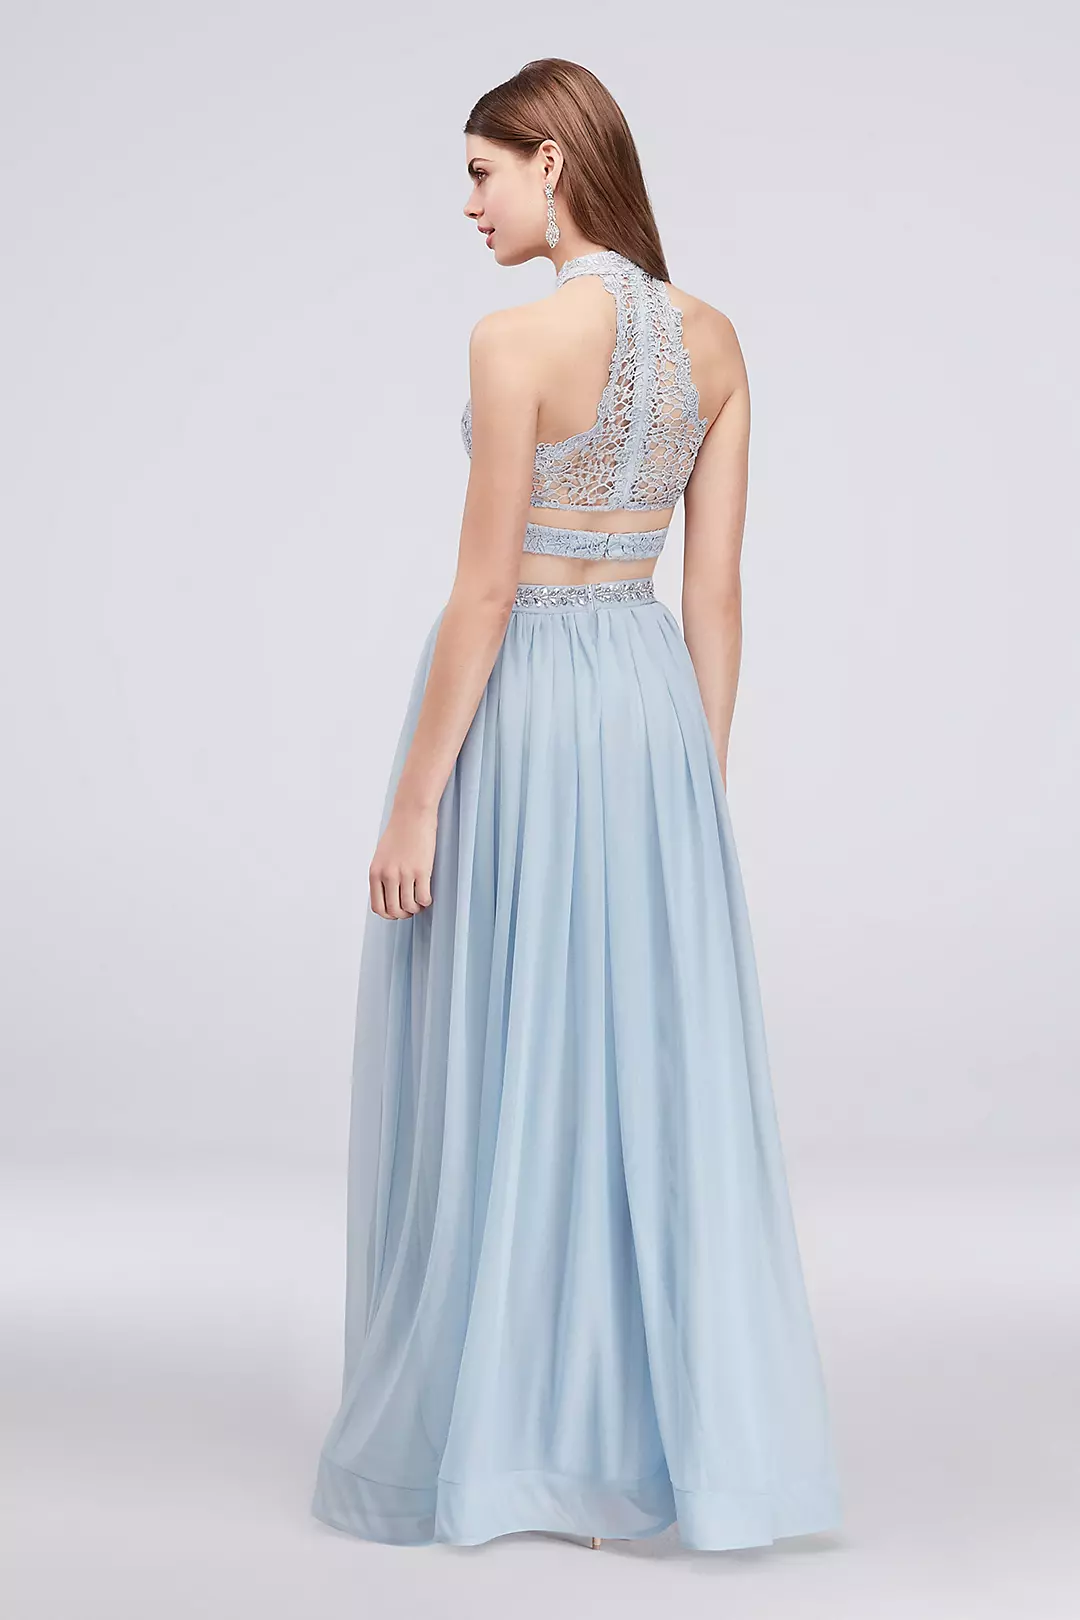 Two-Piece Beaded Jersey and Lace Halter Gown Image 2